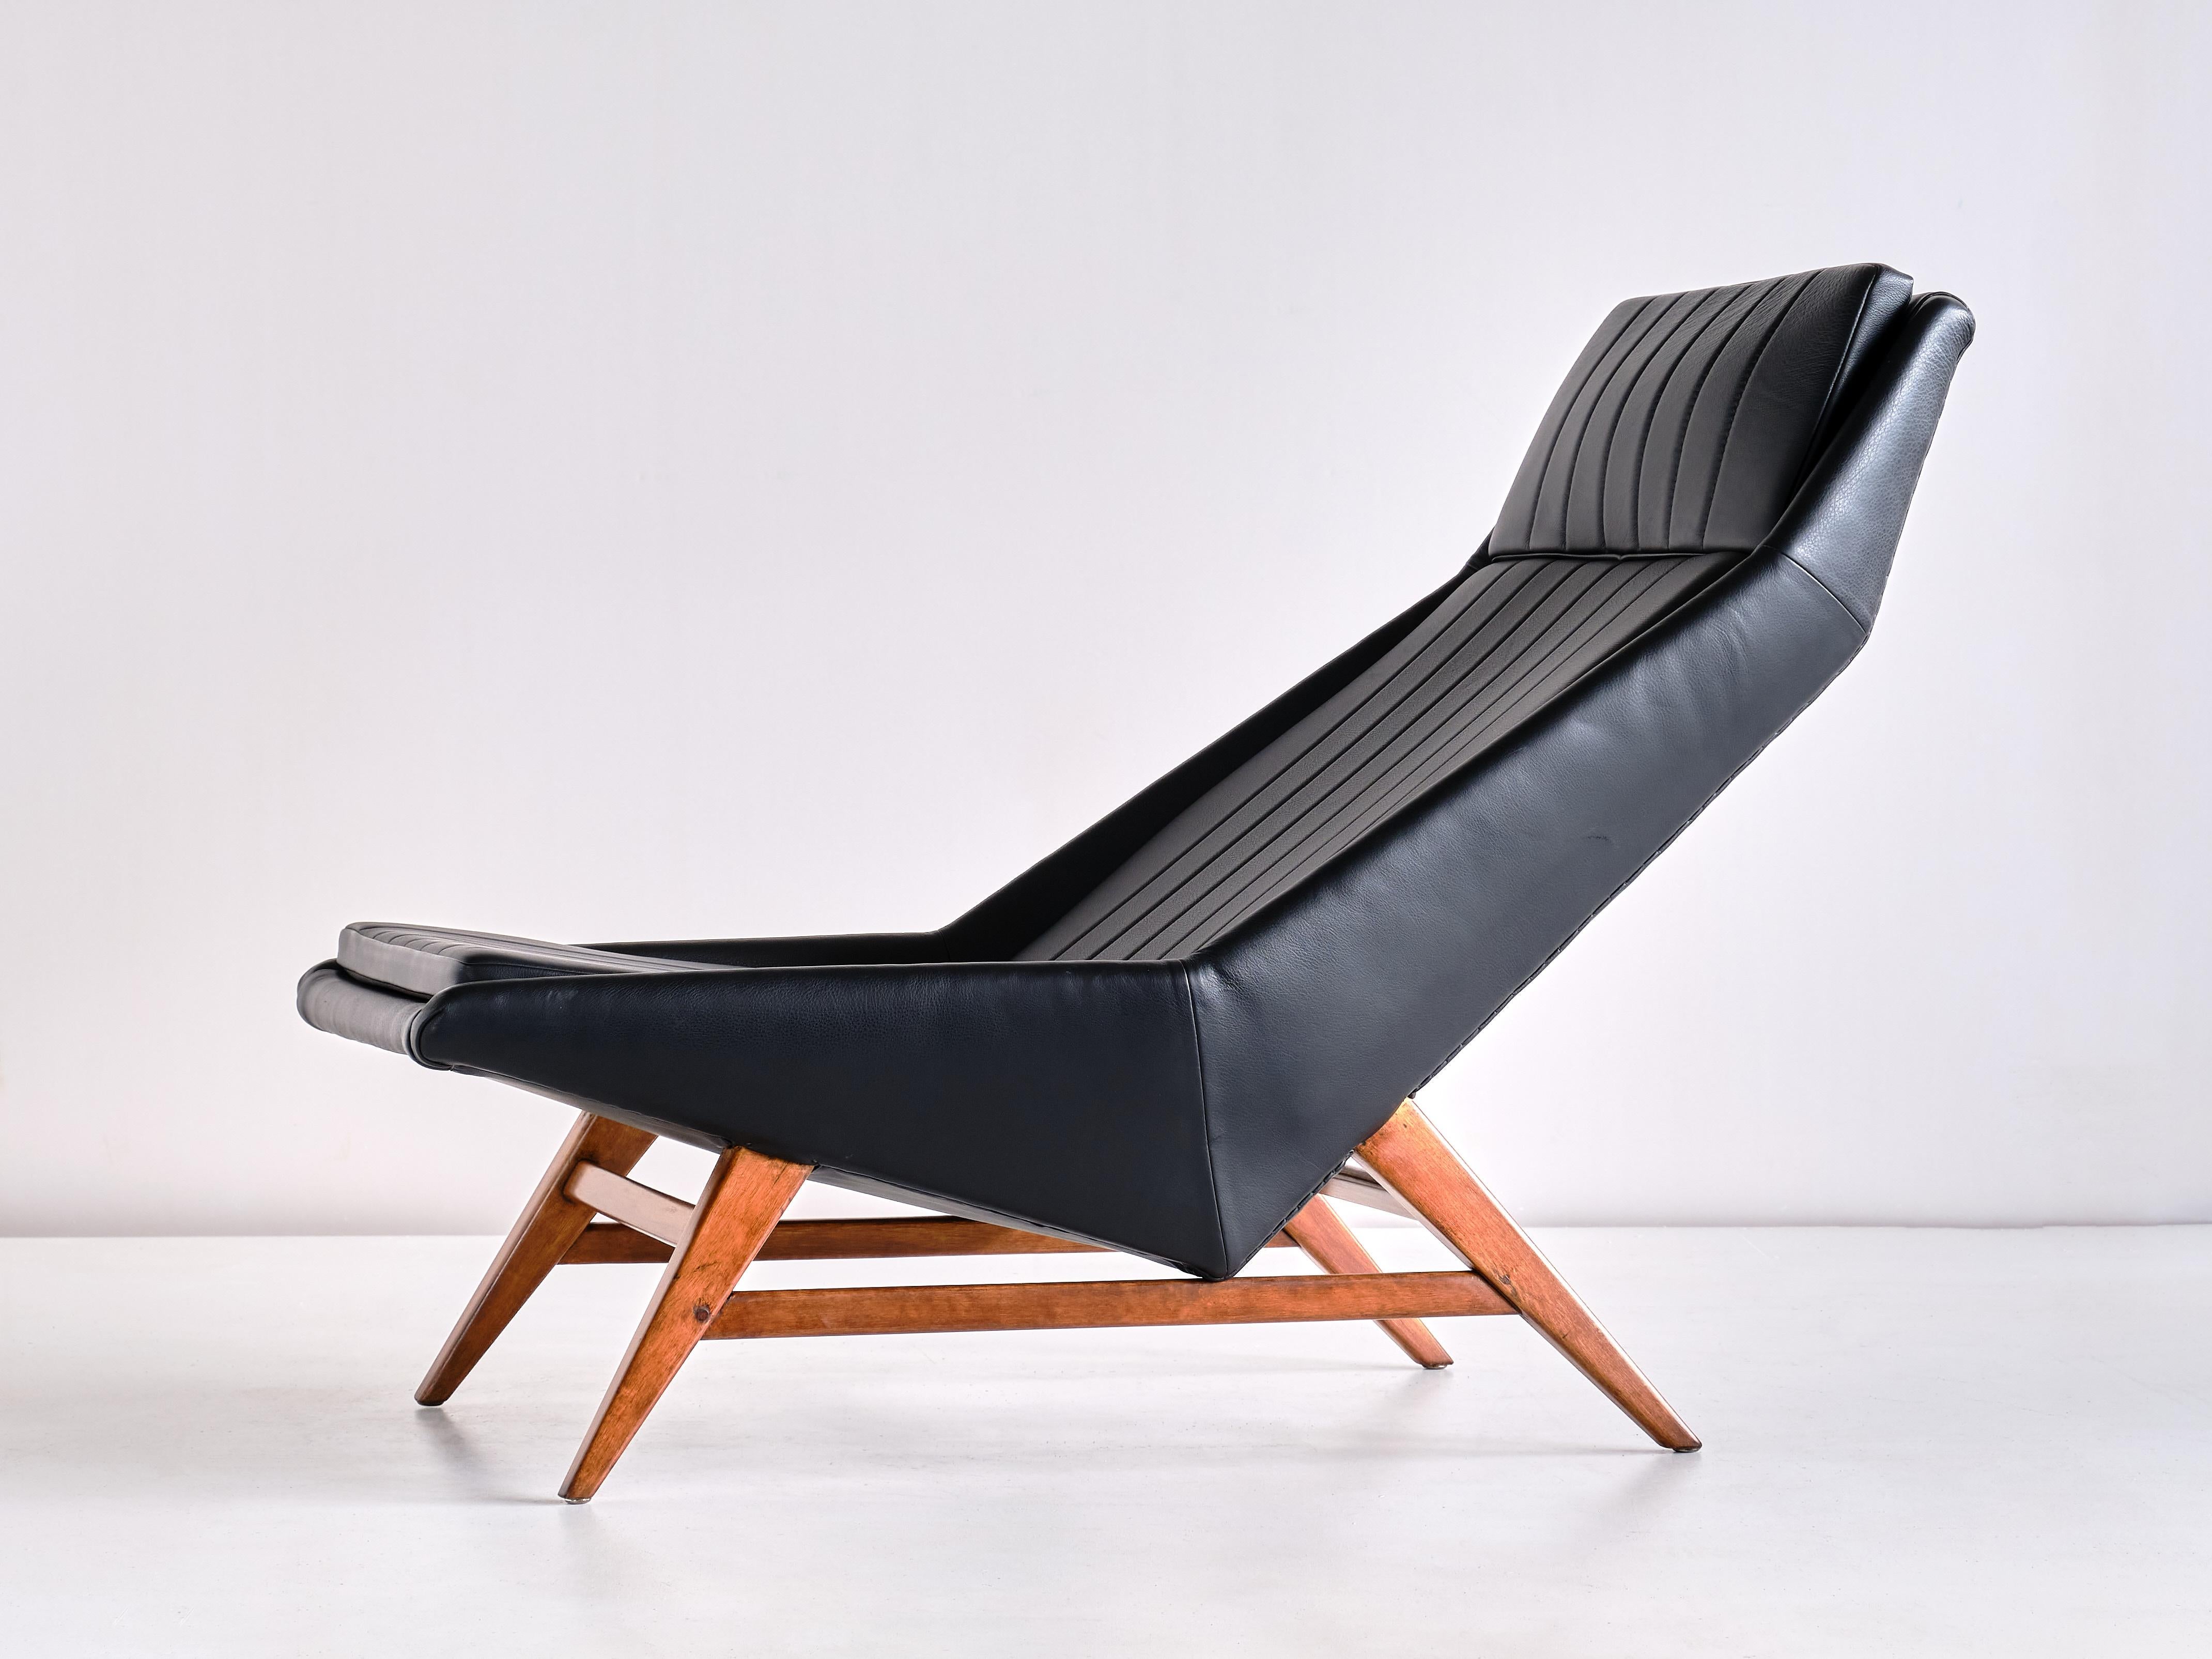 Mid-20th Century Svante Skogh Lounge Chair in Leather and Beech, AB Hjertquist & Co, Sweden, 1955 For Sale